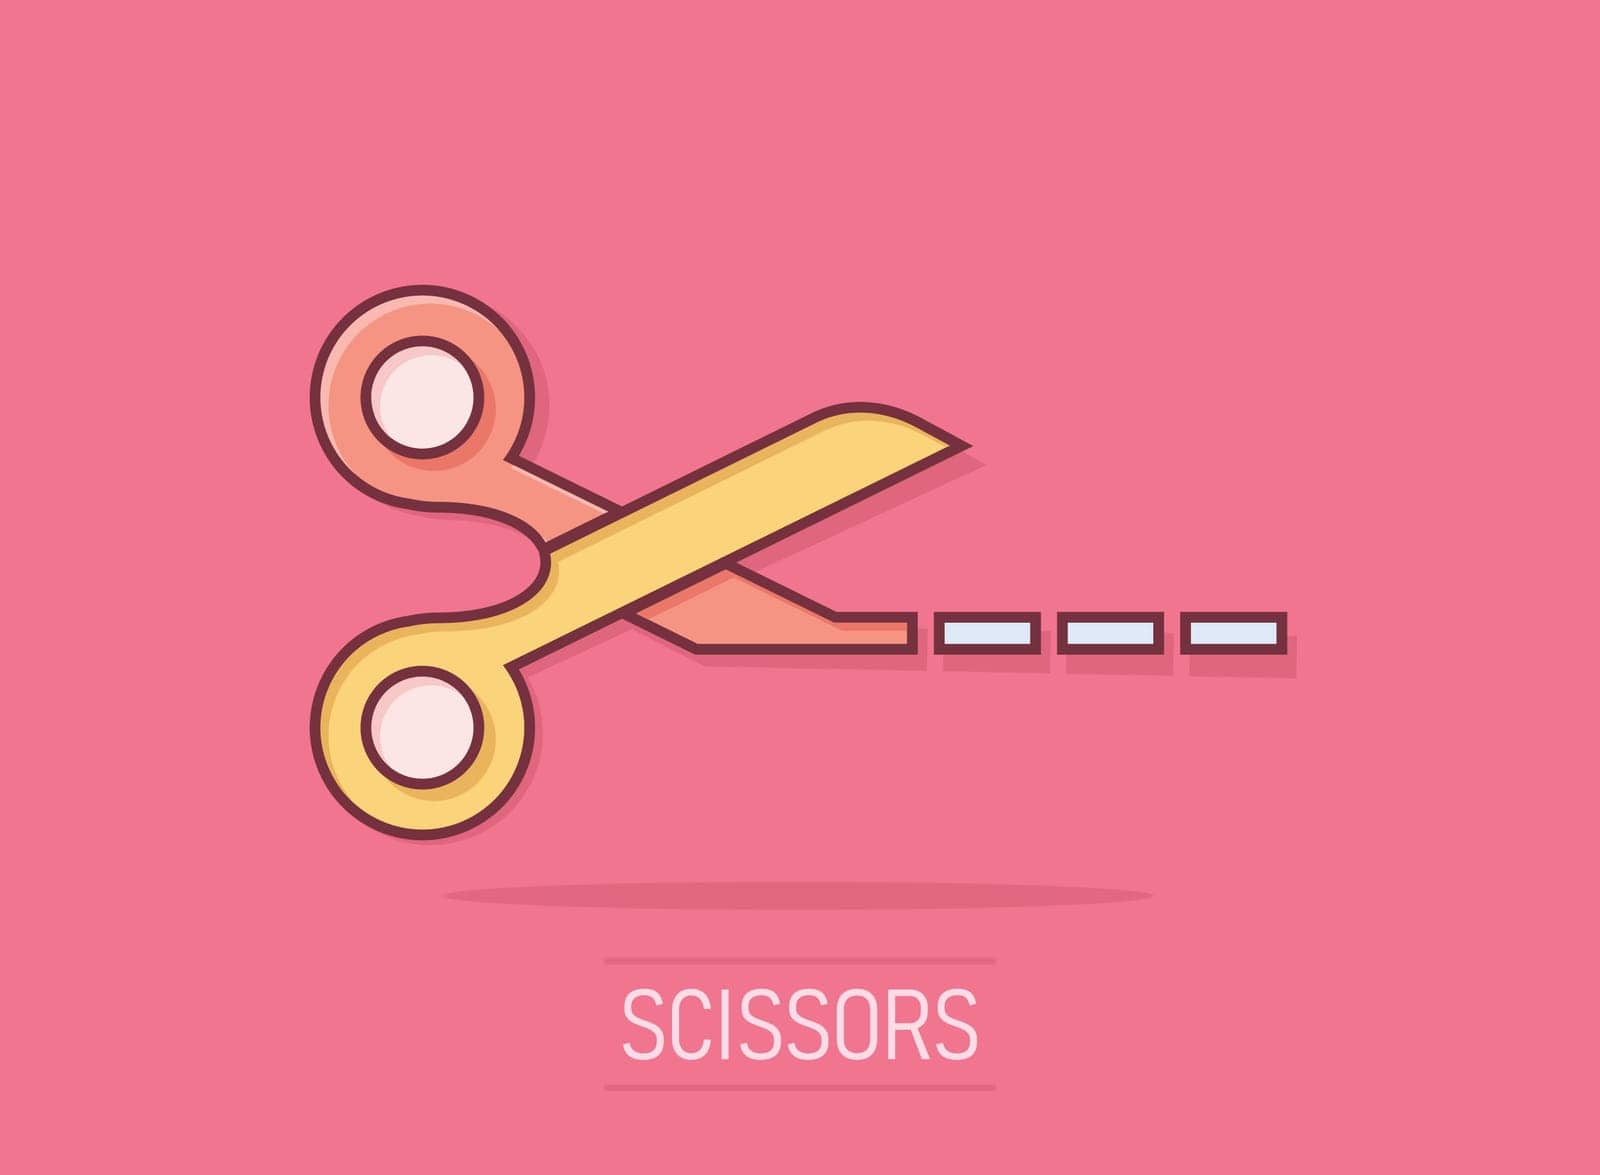 Scissor with cutting line icon in comic style. Cut equipment cartoon vector illustration on isolated background. Cutter splash effect business concept. by LysenkoA